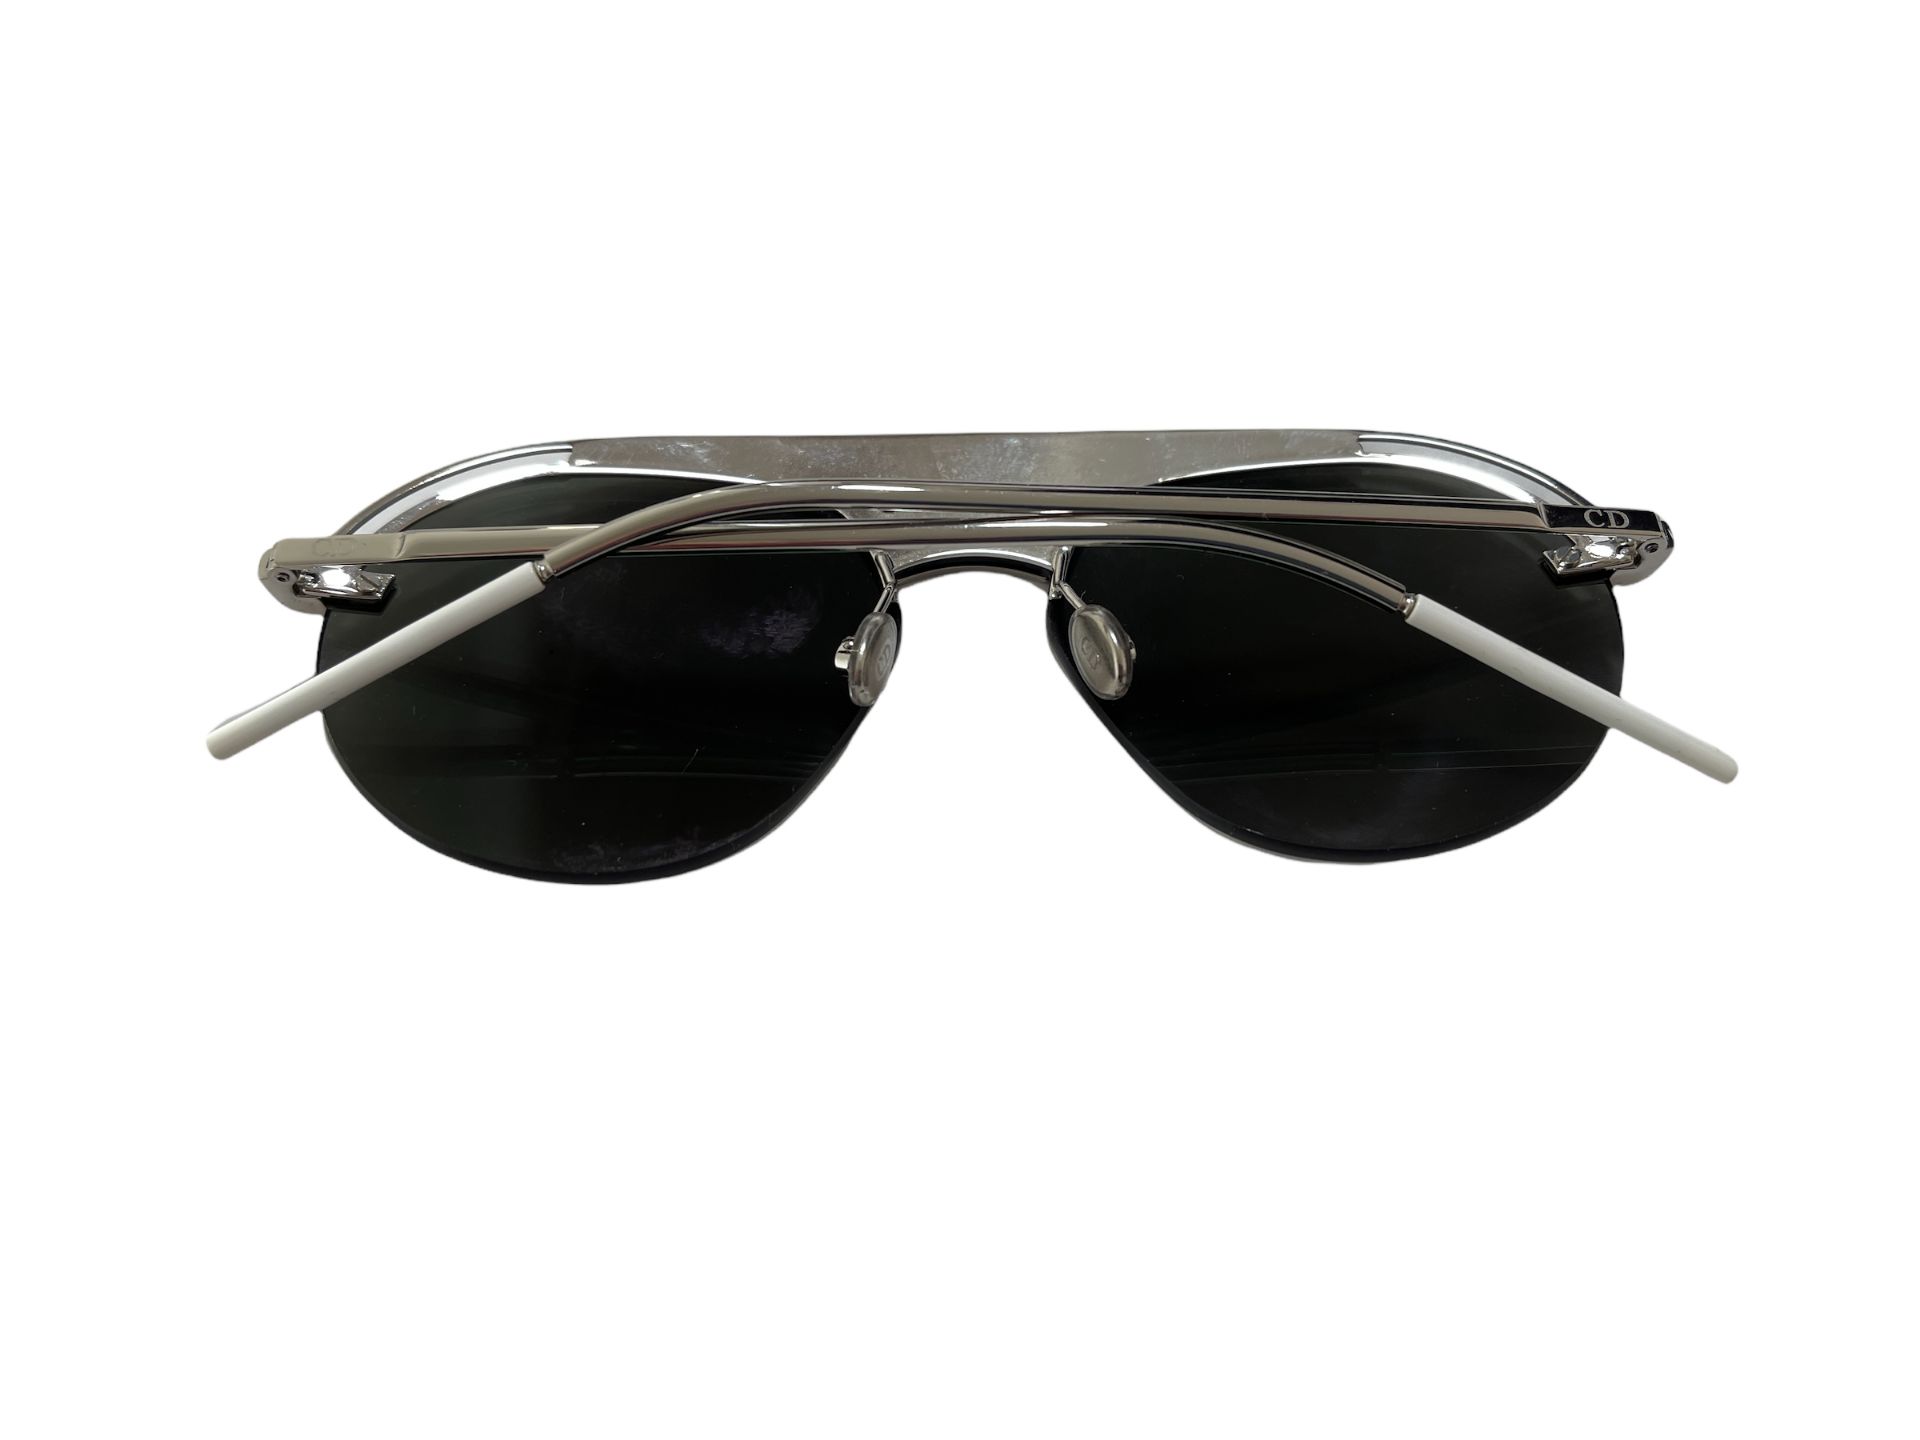 Dior Revolution Sunglasses 0100T Palladium/White 99mm - Surplus Stock from Our Private Jet Charter.. - Image 7 of 11